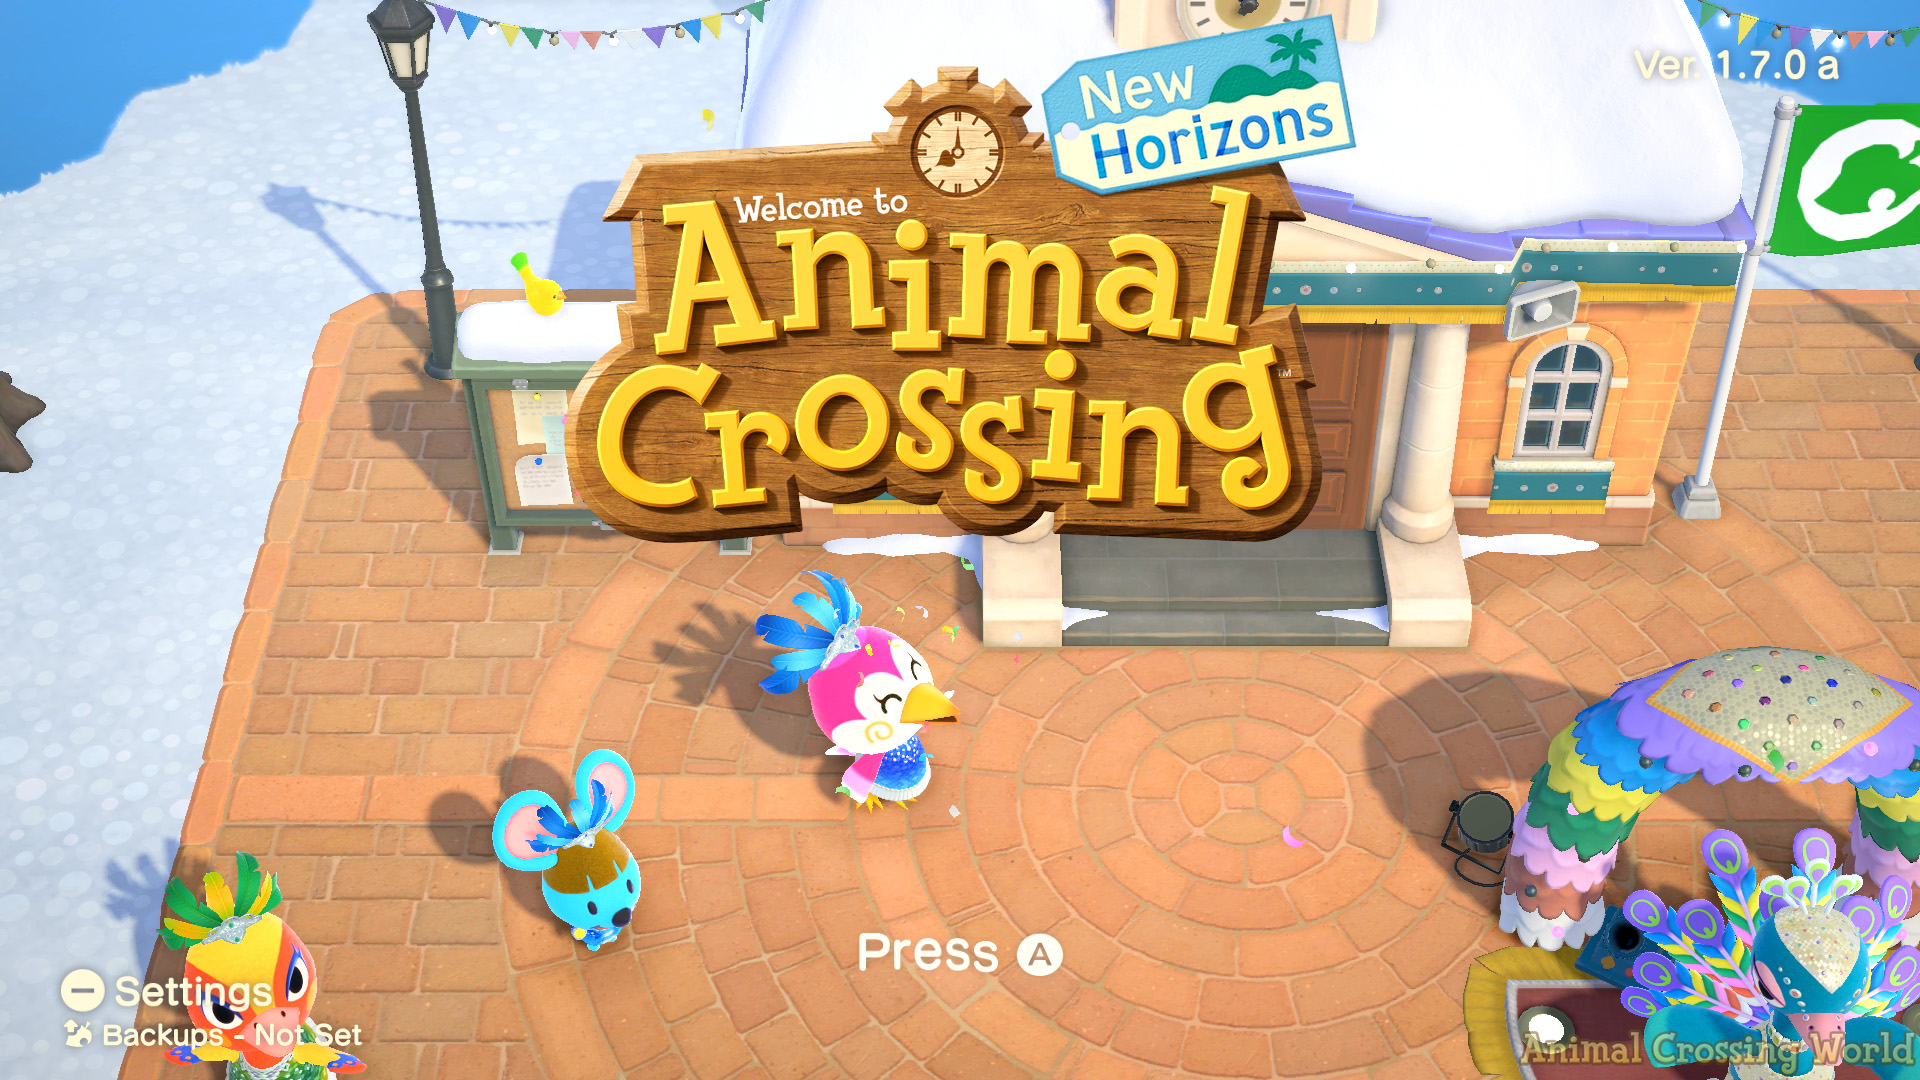 Celebrate Festivale Event With Pavé Today In Animal Crossing: New Horizons  For Exclusive Prizes - Animal Crossing World